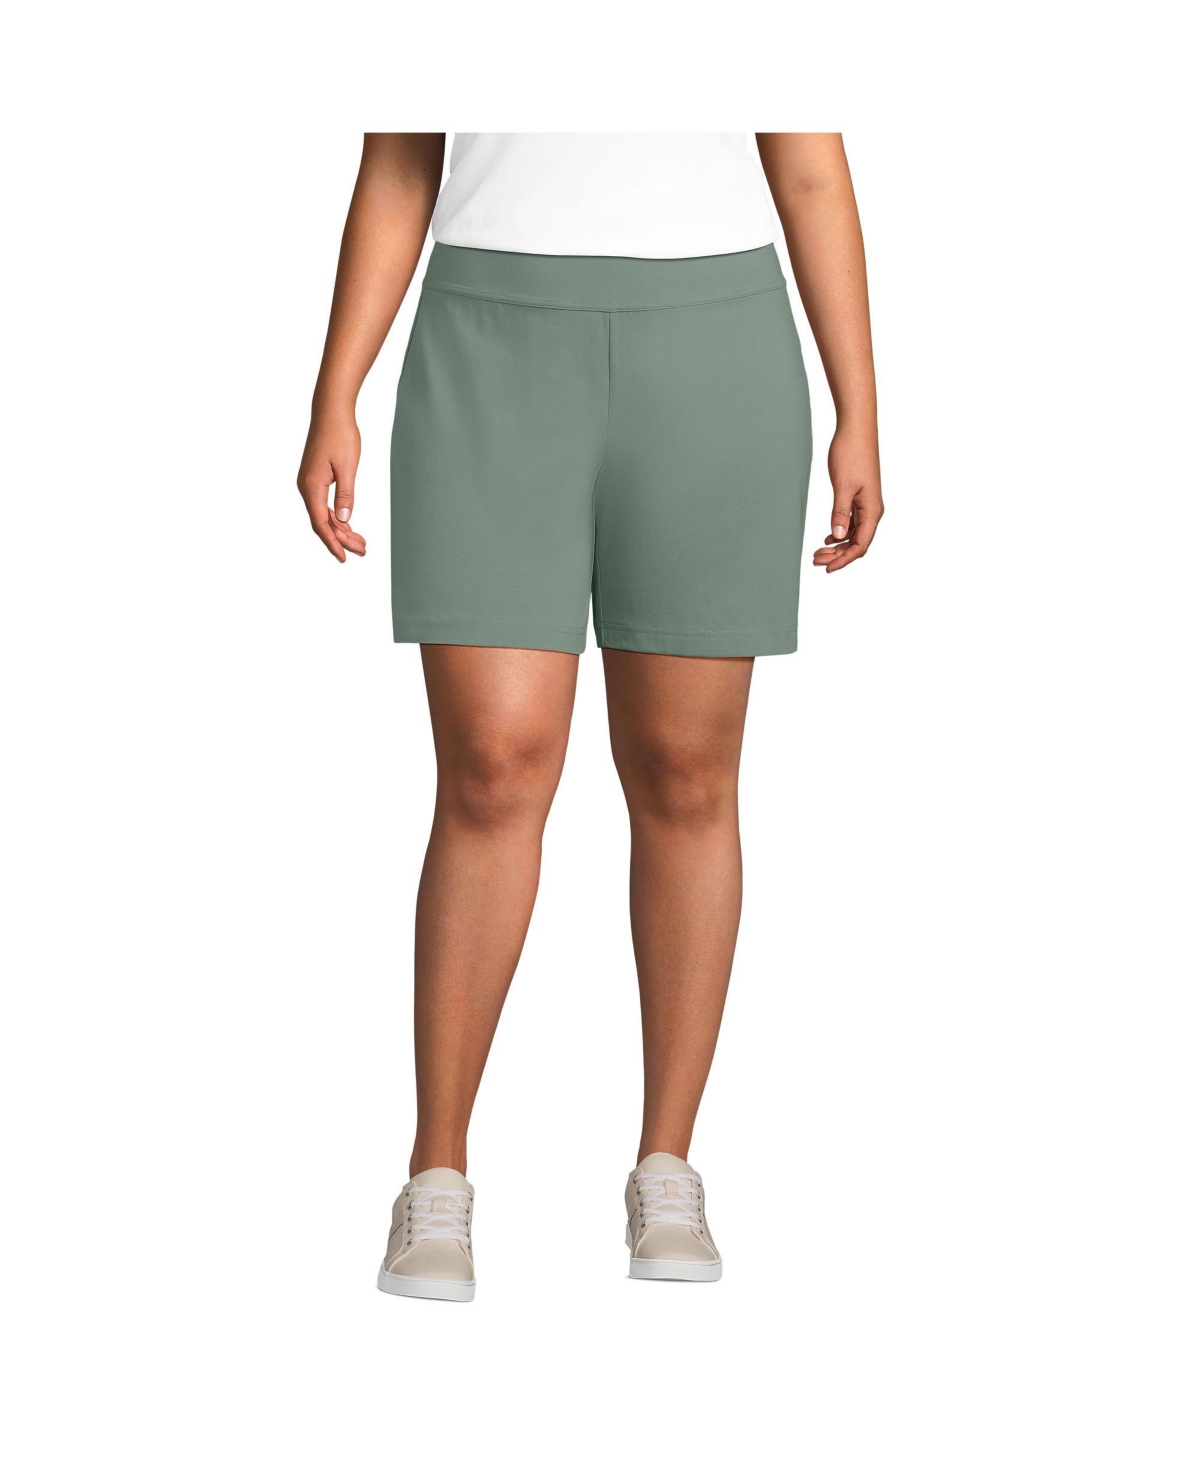 Plus Size Starfish Mid Rise 7" Shorts - Lily pad green